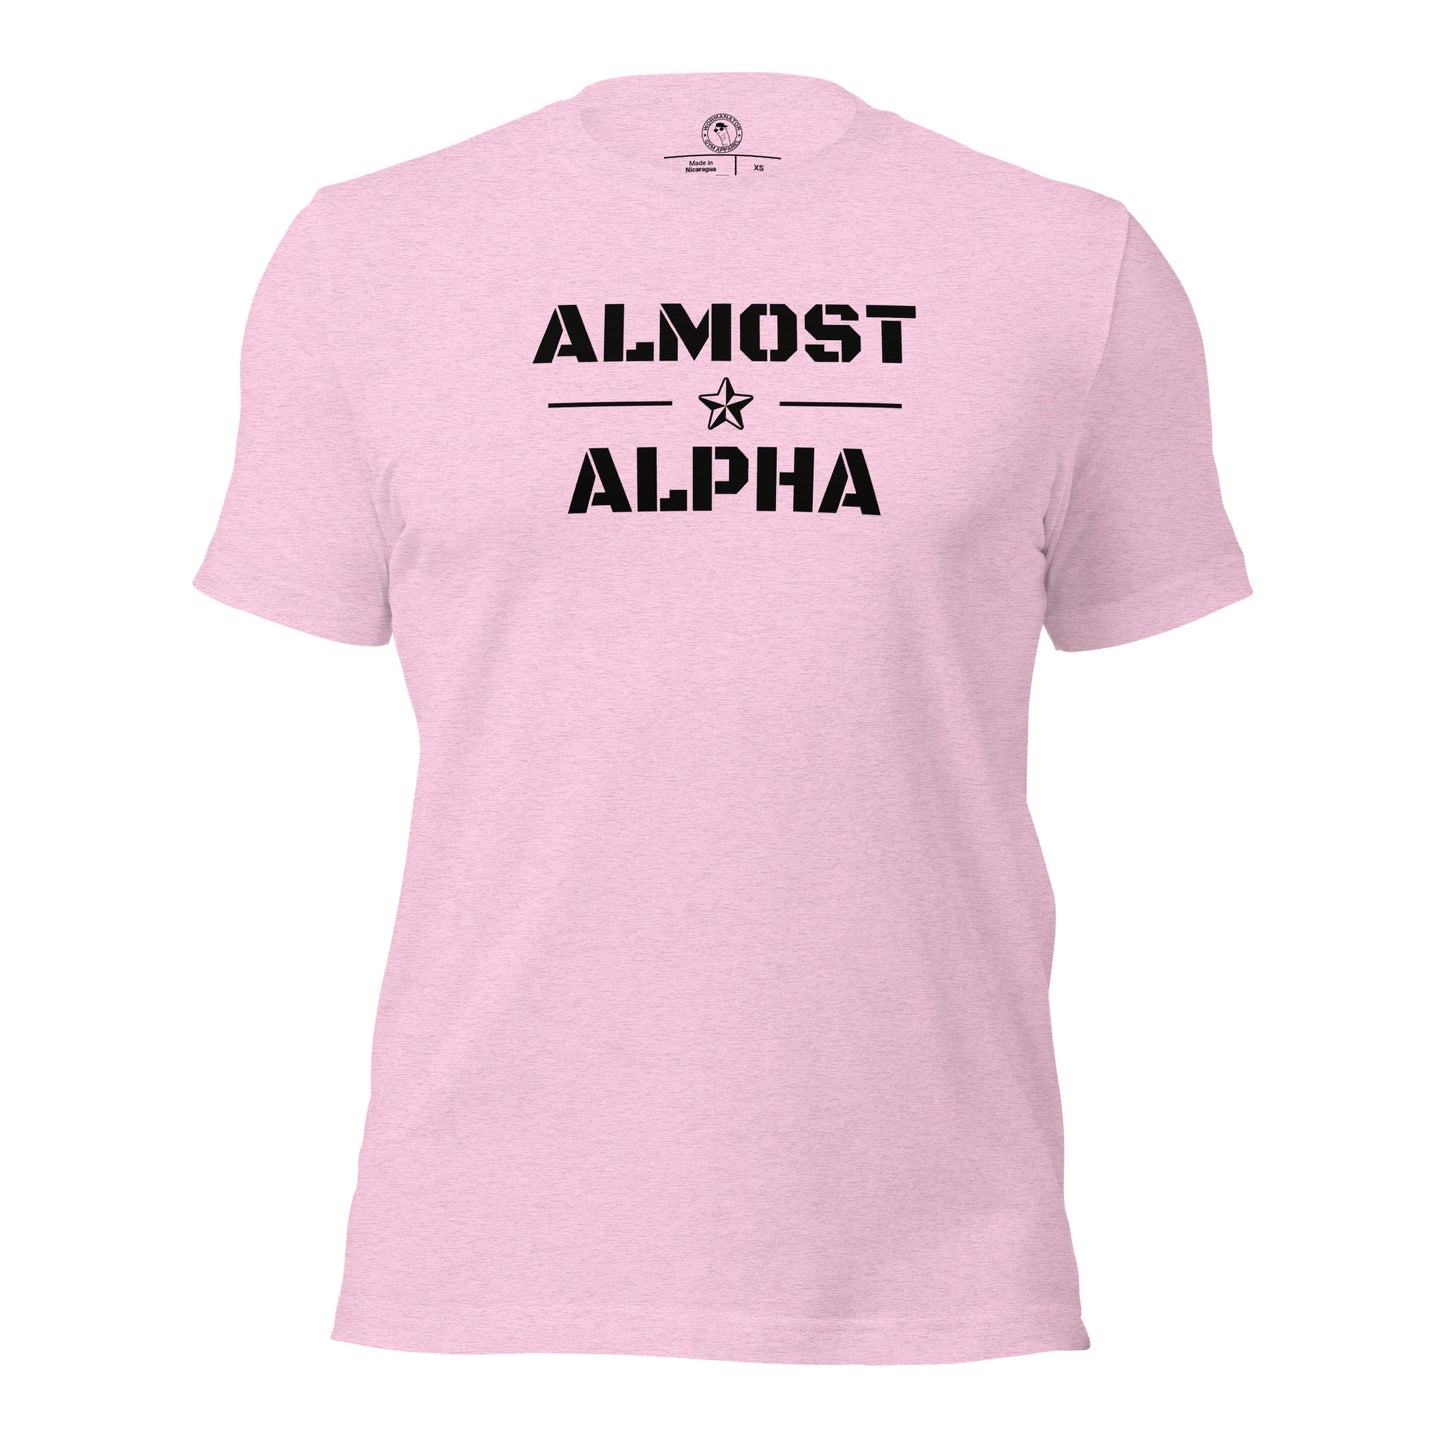 Almost Alpha Shirt in Heather Prism Lilac